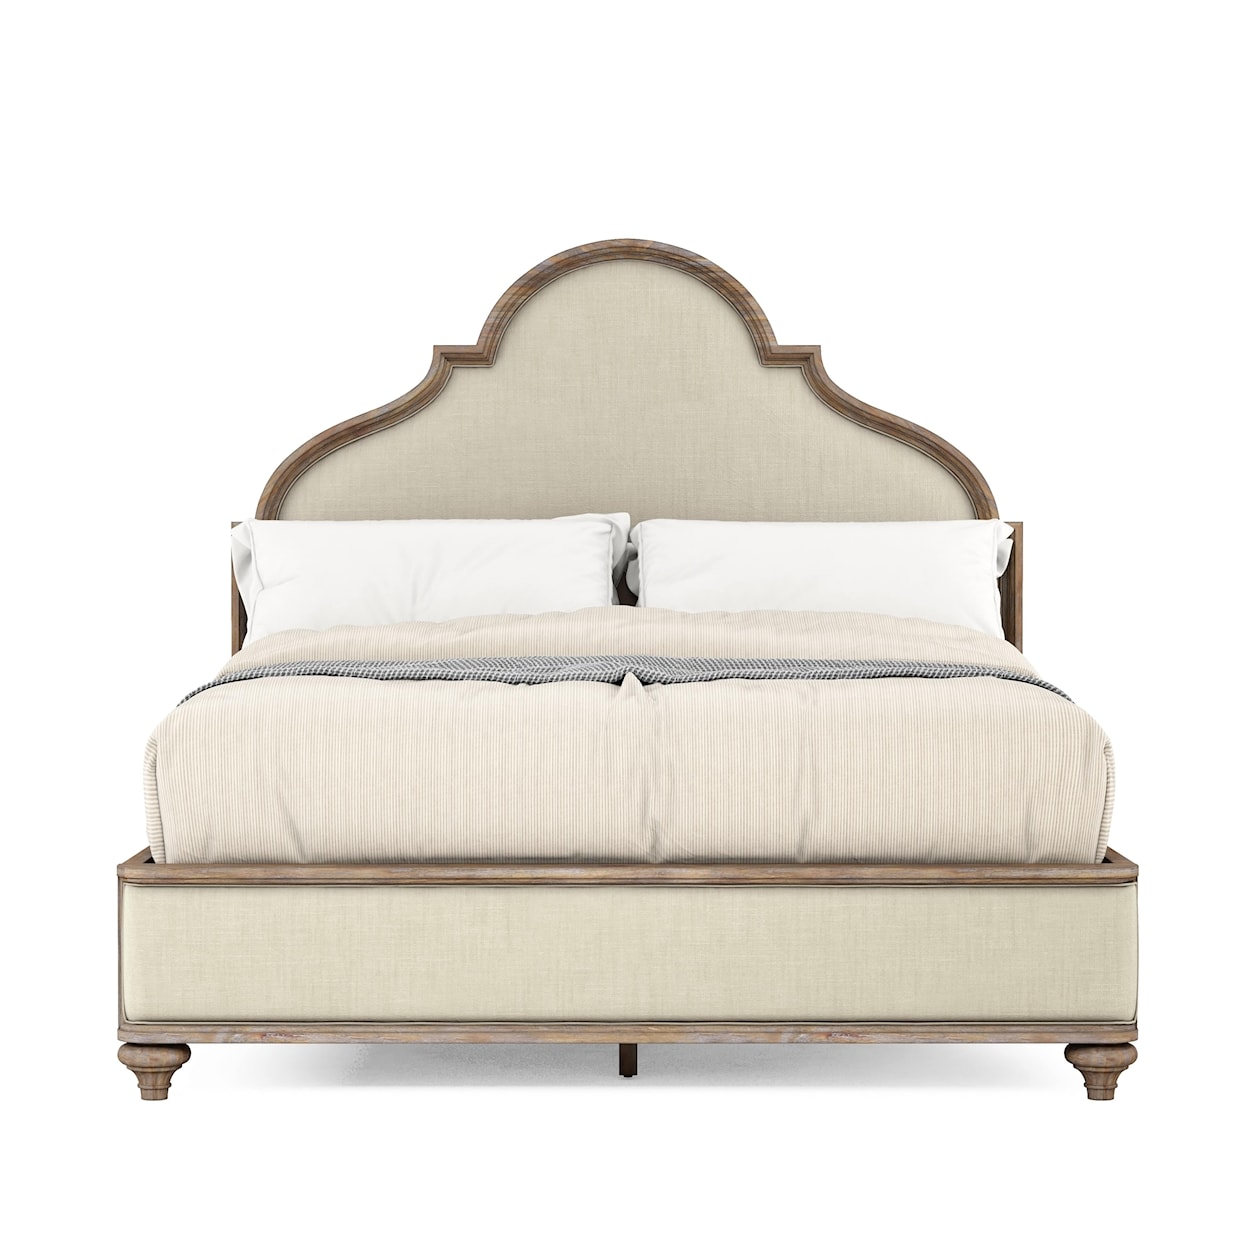 A.R.T. Furniture Inc Architrave Queen Upholstered Panel Bed